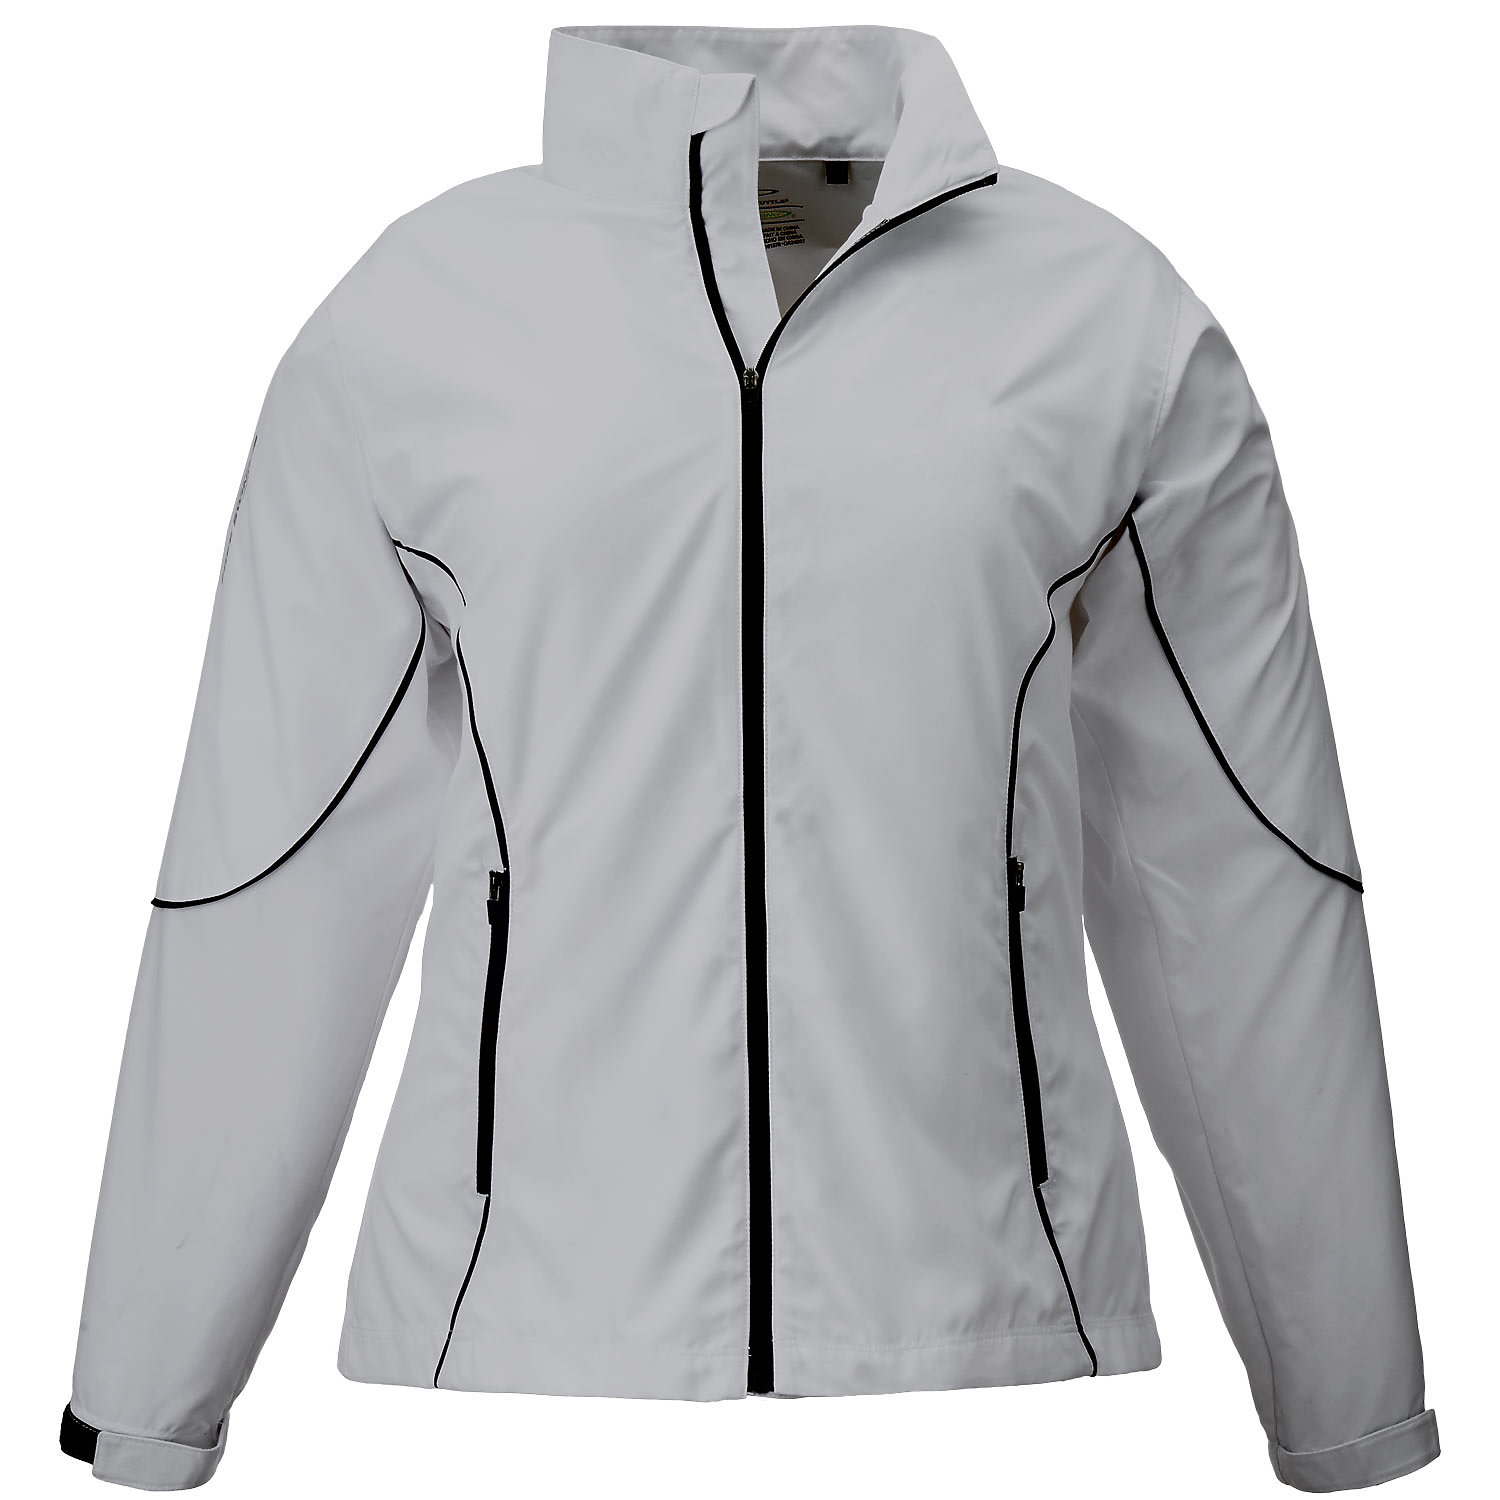 Page & Tuttle P1987 - Women's Piped Full-Zip Windshirt